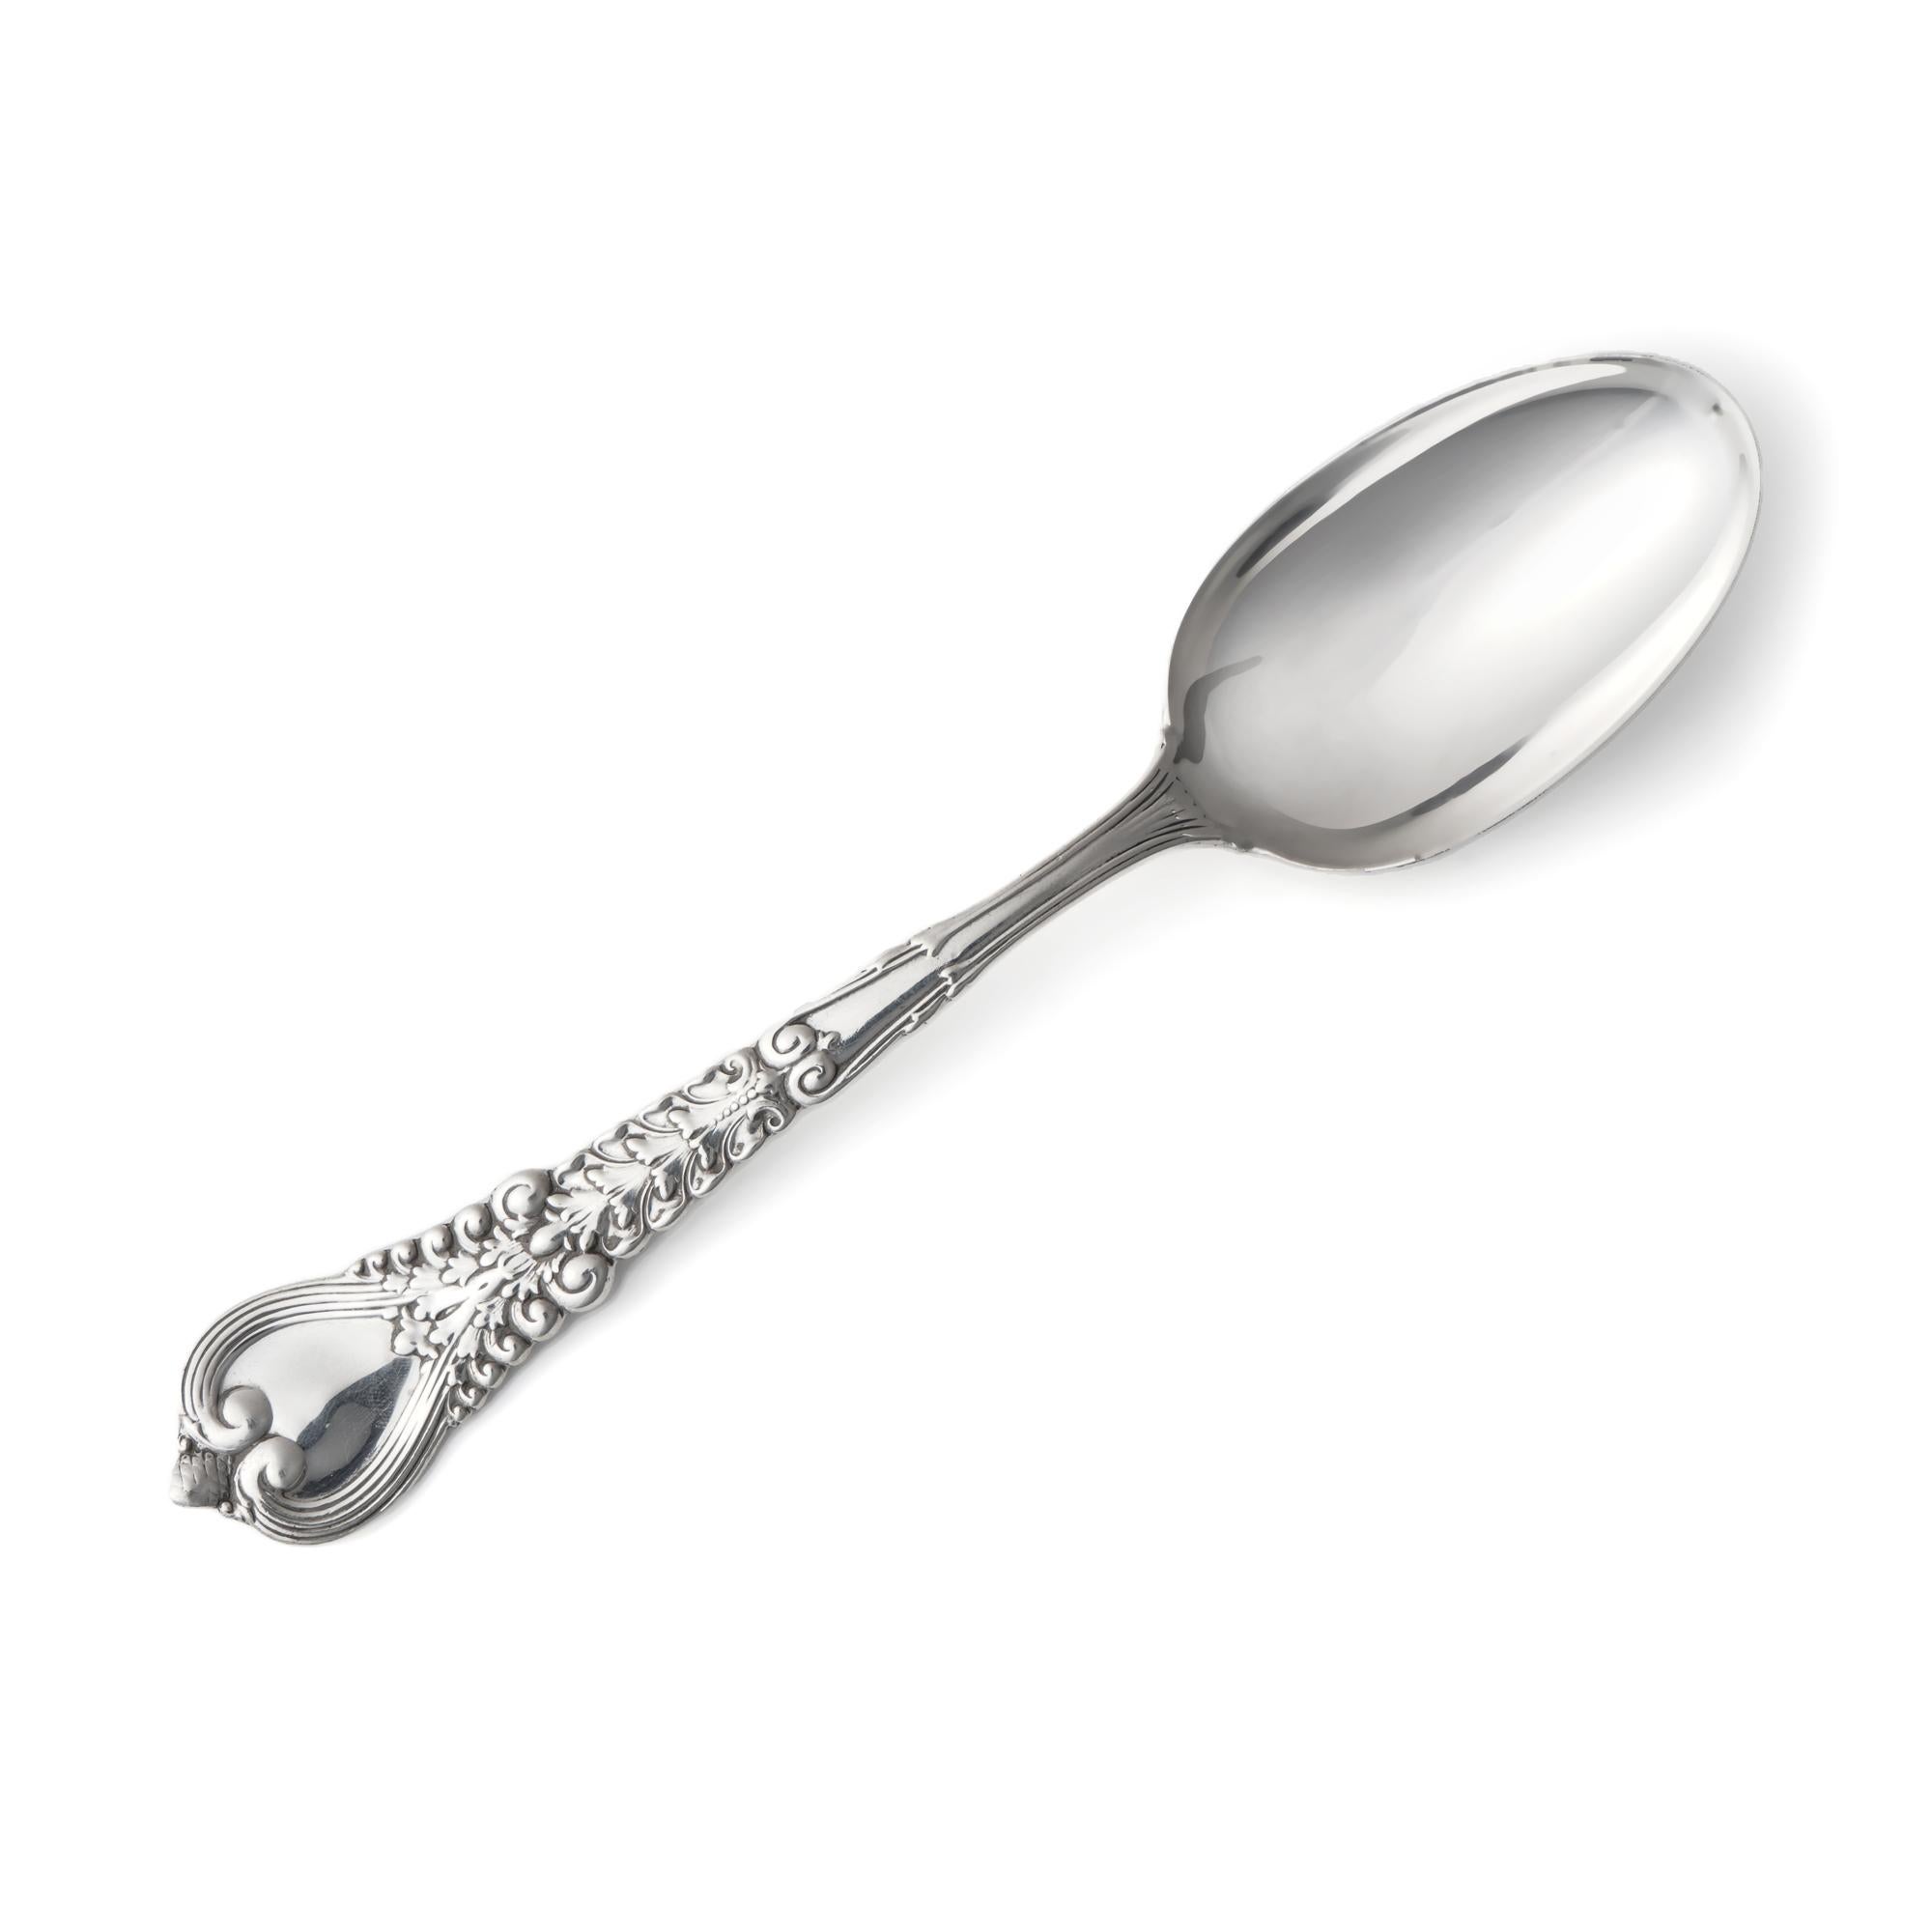 Antique Tiffany & Co. Sterling Silver Florentine Pattern Dessert Spoon For Sale 2